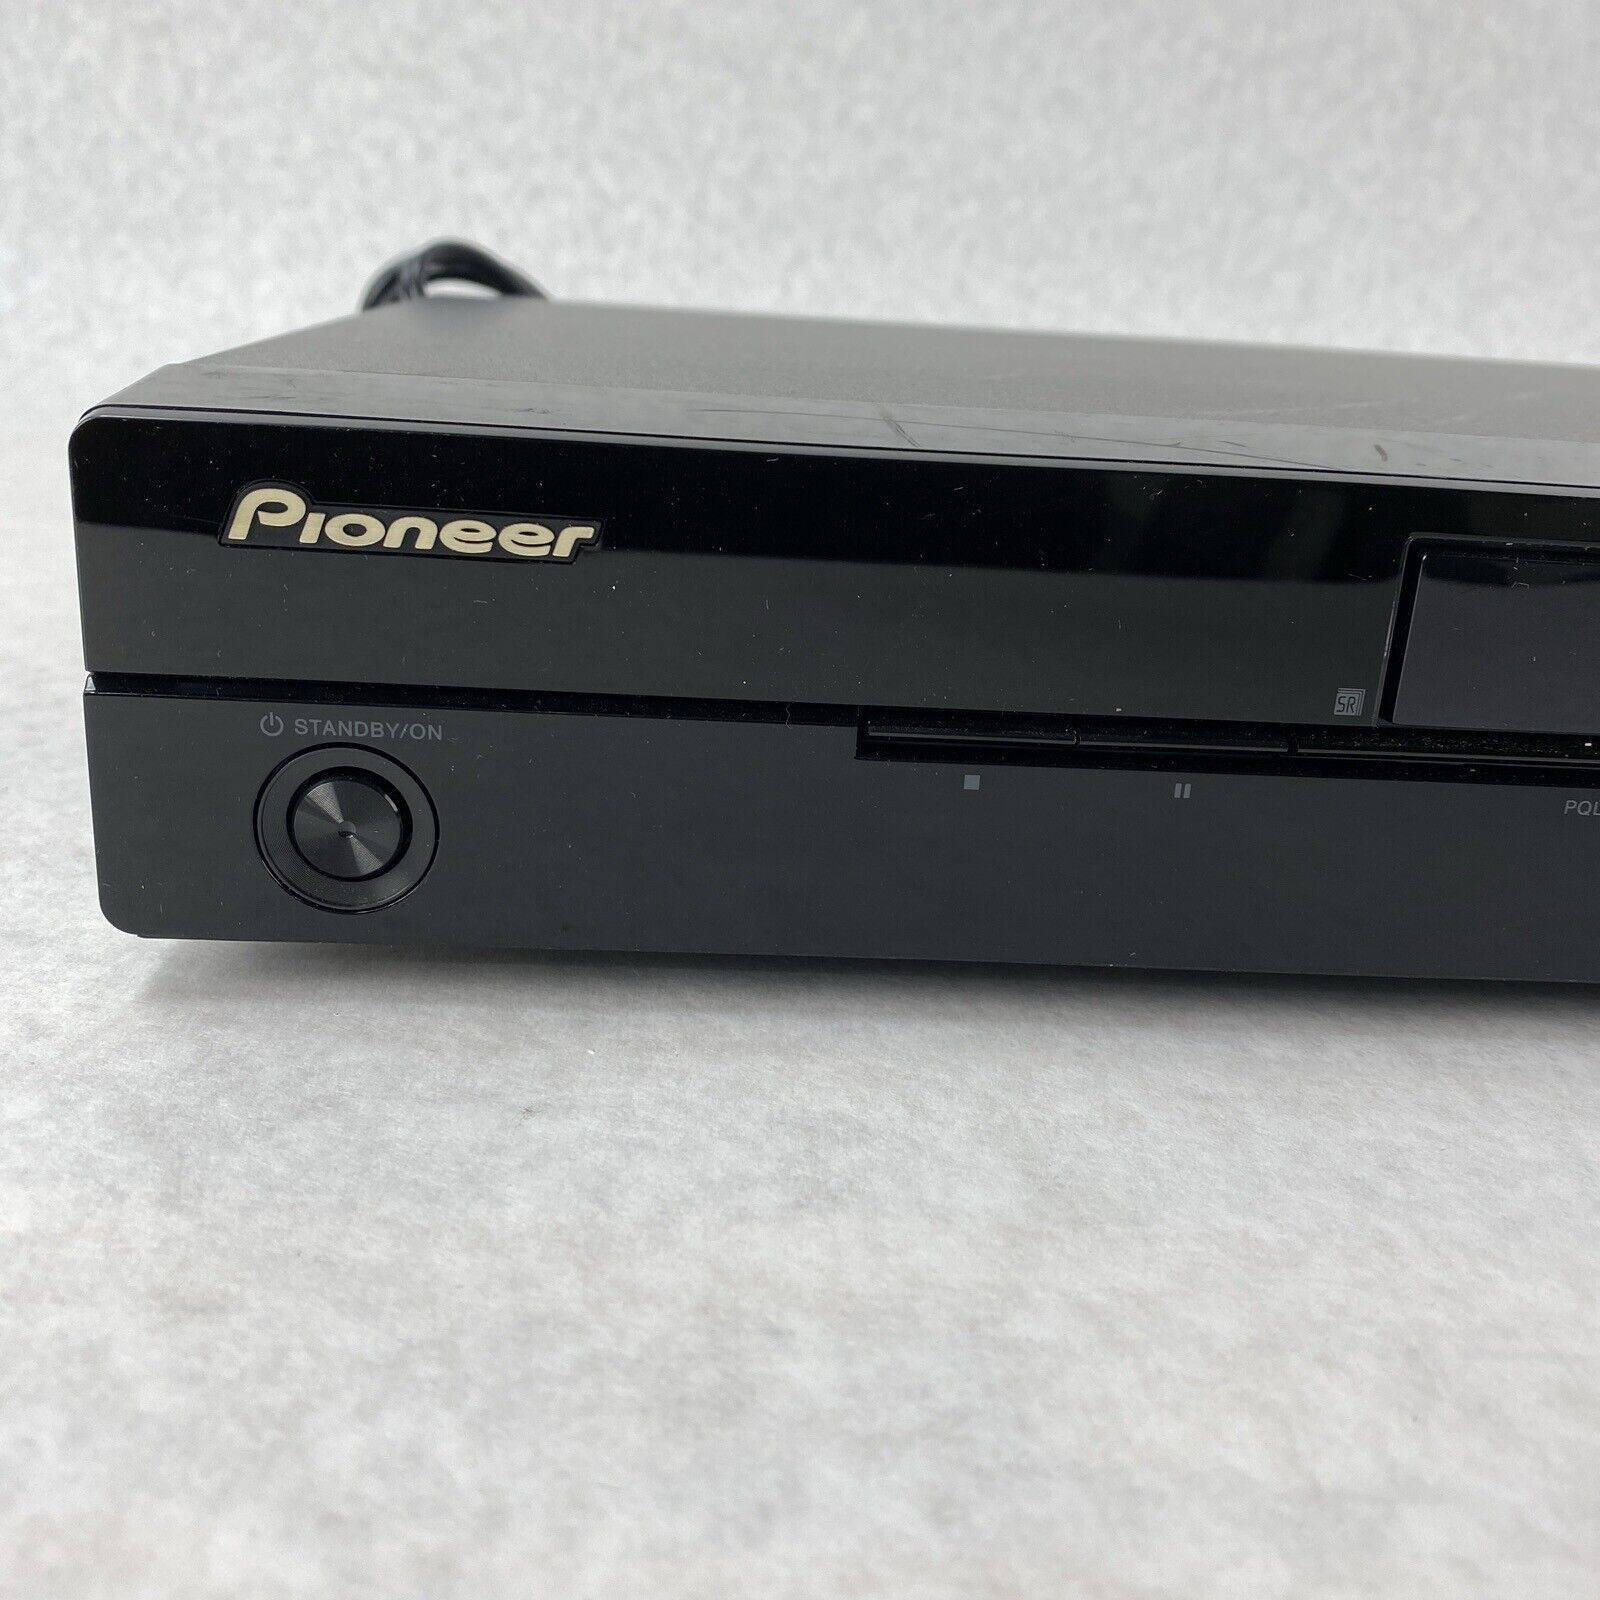 Pioneer BDP-430 3D DVD Blu-Ray HD Stream Network Player TESTED but NO REMOTE